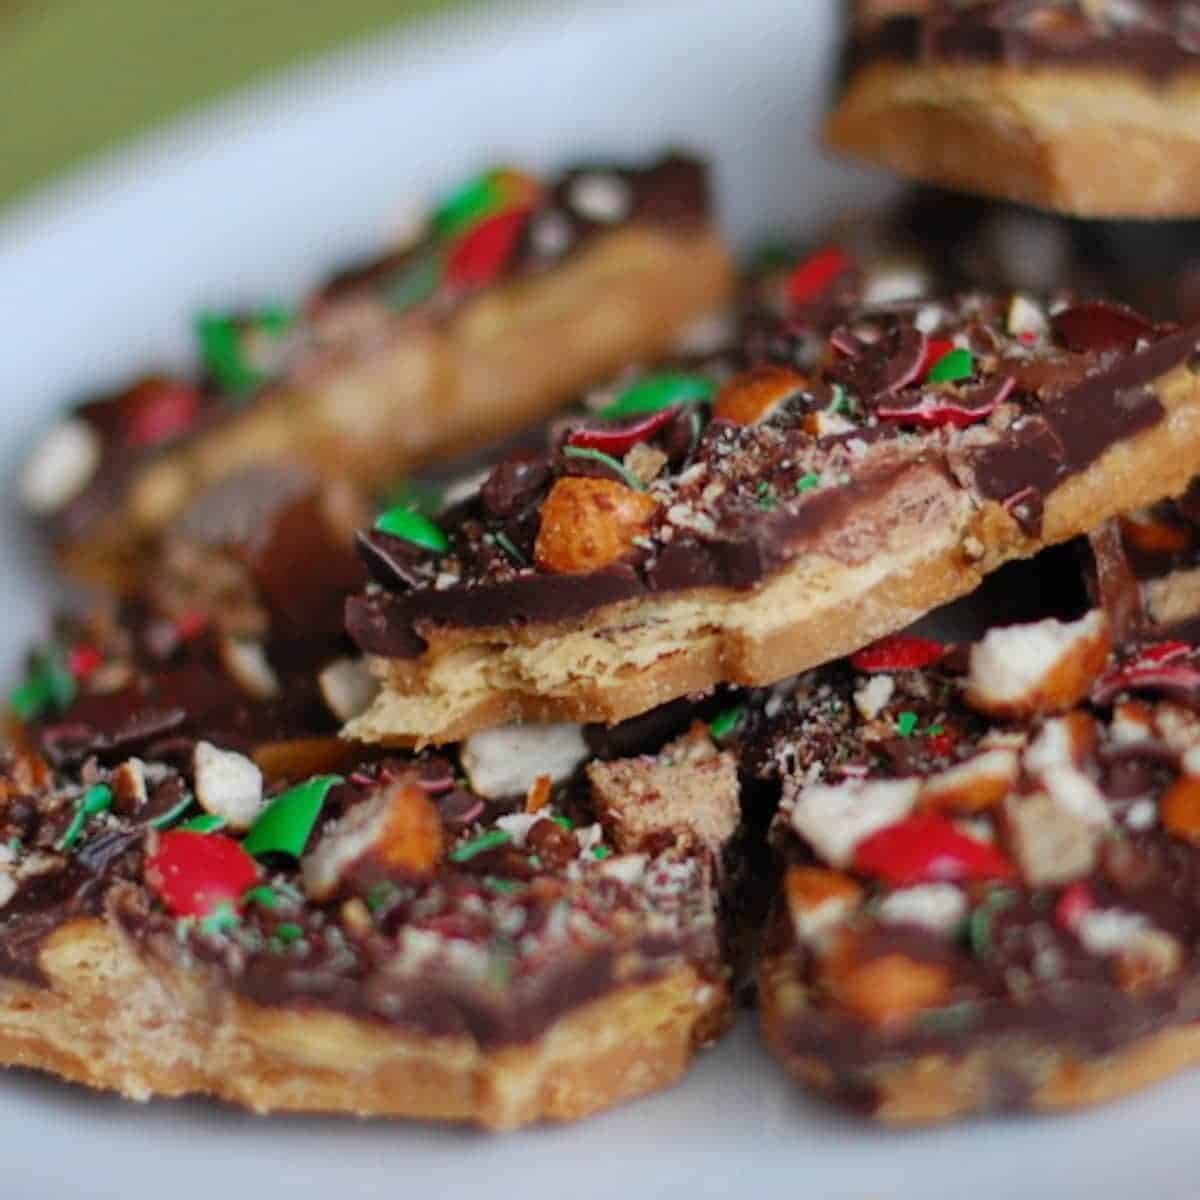 Pieces of salted toffee with colorful chocolate candy topping.